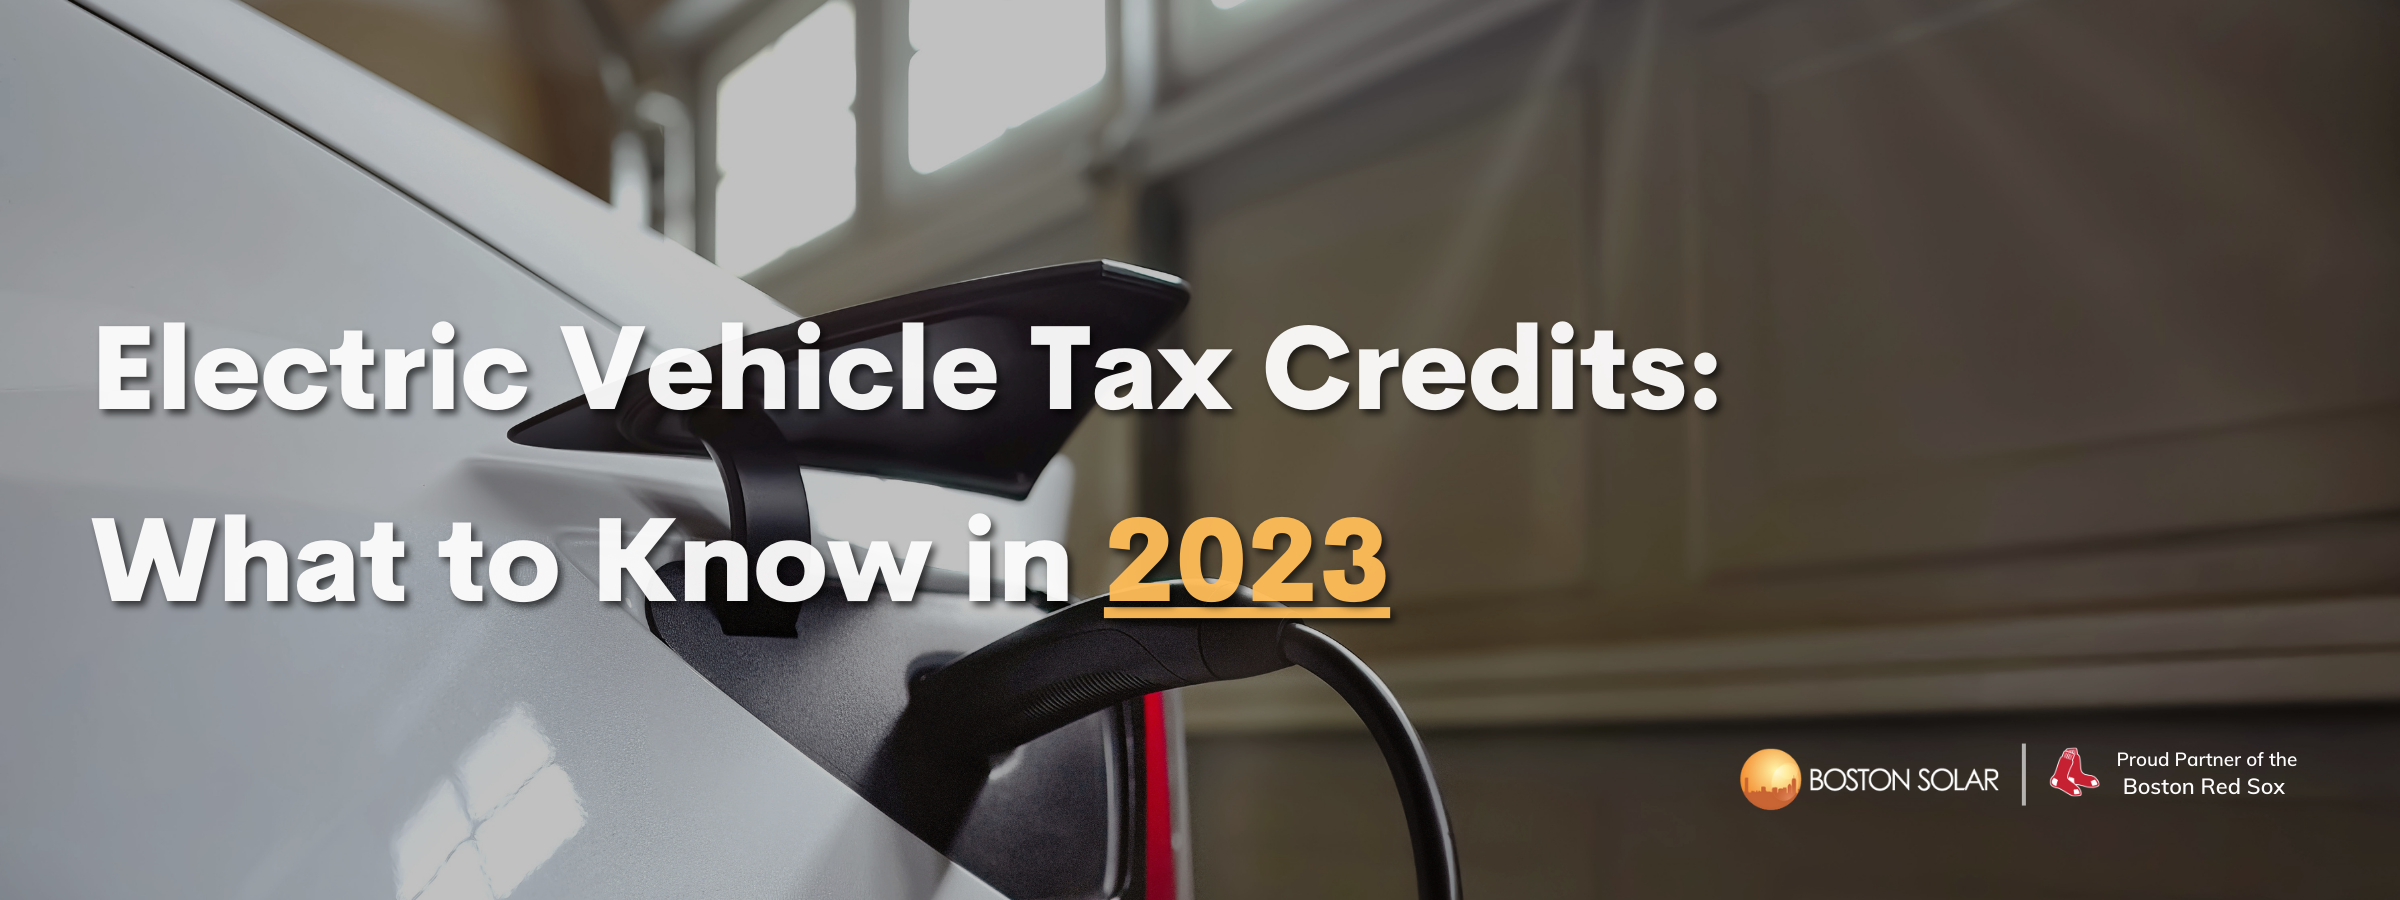 Electric Vehicle Tax Credits: What to Know in 2023